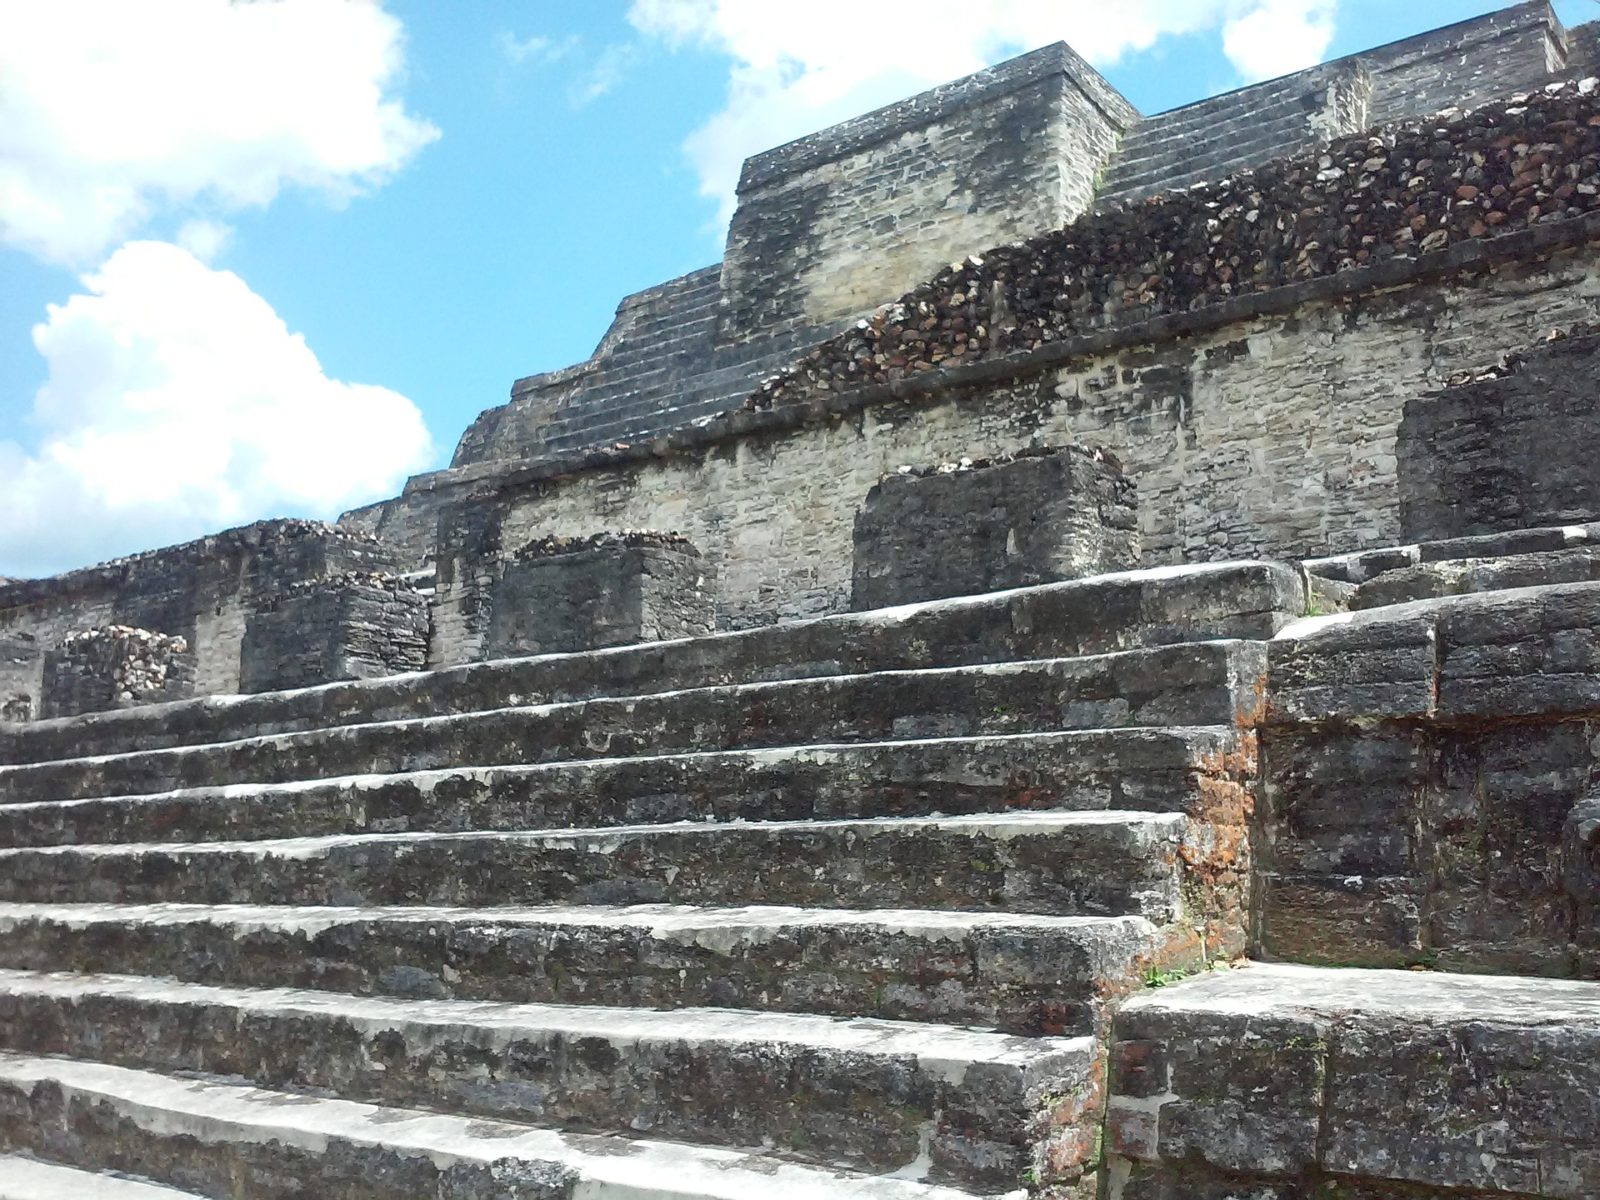 Altun Ha Excursion Review: A Must-See for Belize City Visitors